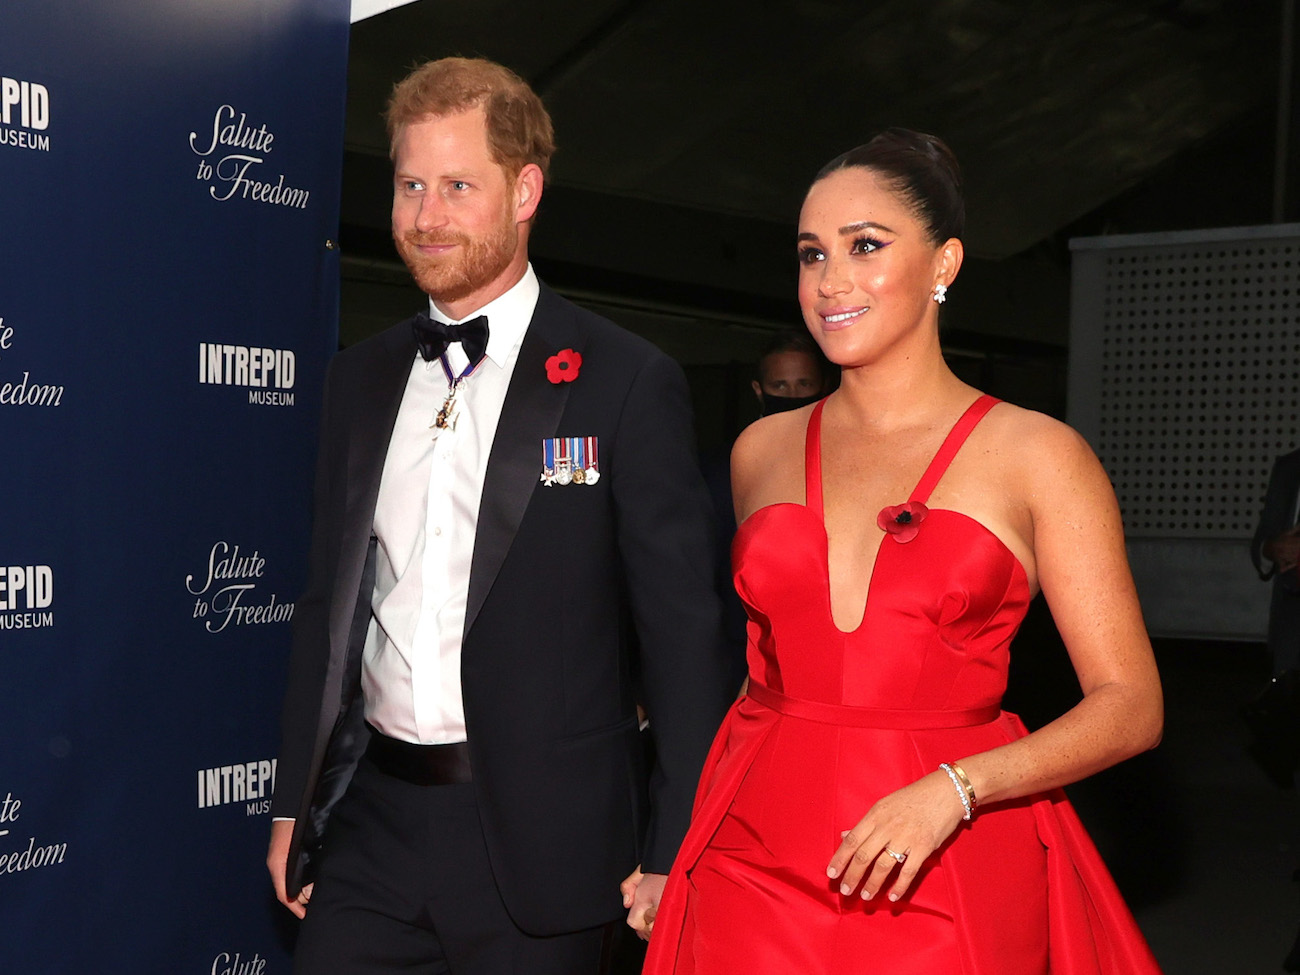 Prince Harry and Meghan Markle hold hands as they arrive at the Salute to Freedom Gala wearing a tuxedo and red gown